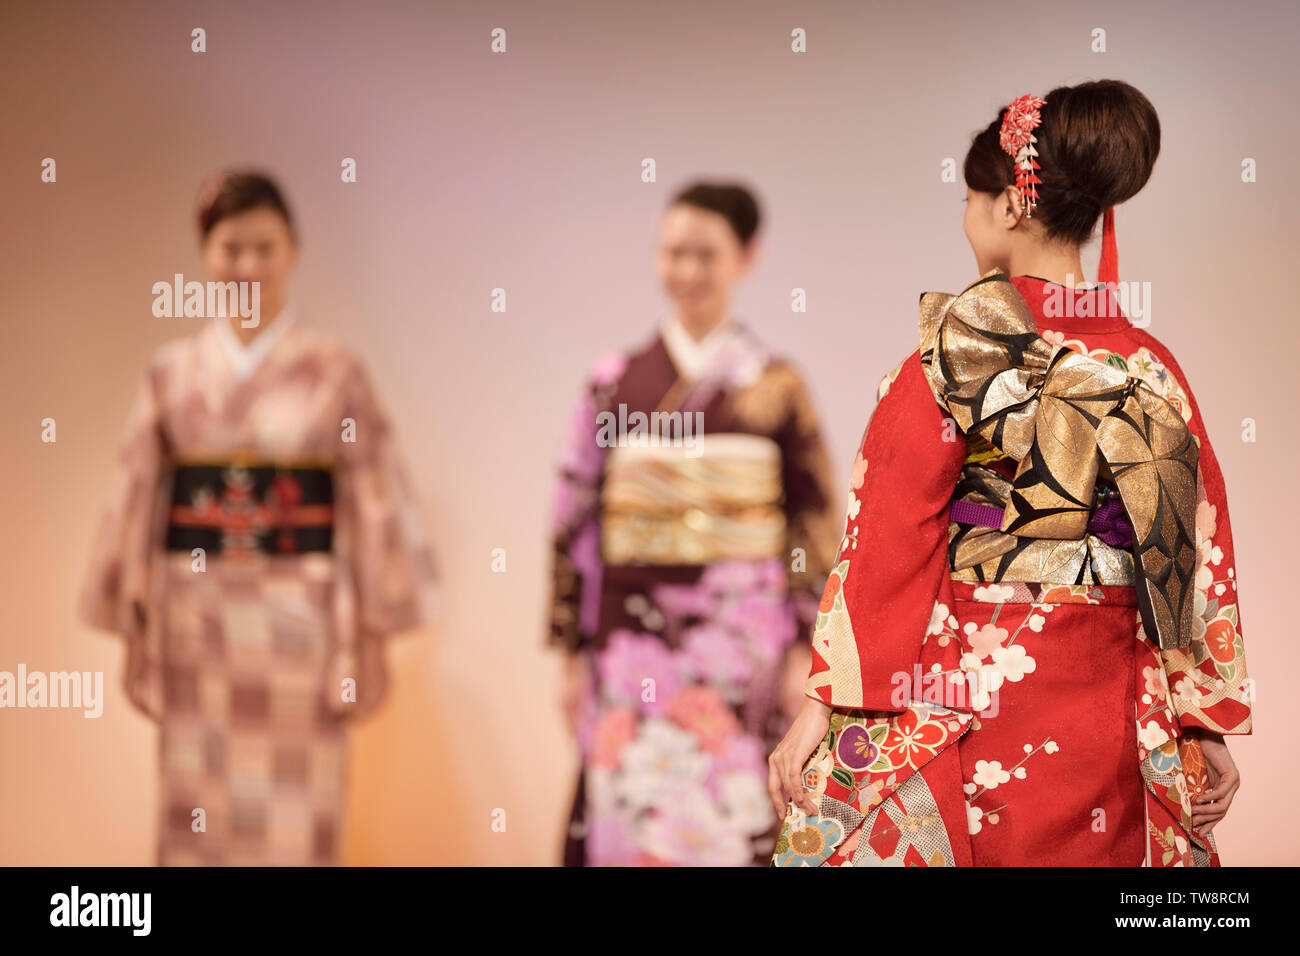 Closeup of an intricate kimono obi belt design in red and gold. Japanese women at a kimono fashion show in Kyoto, Japan. Stock Photo